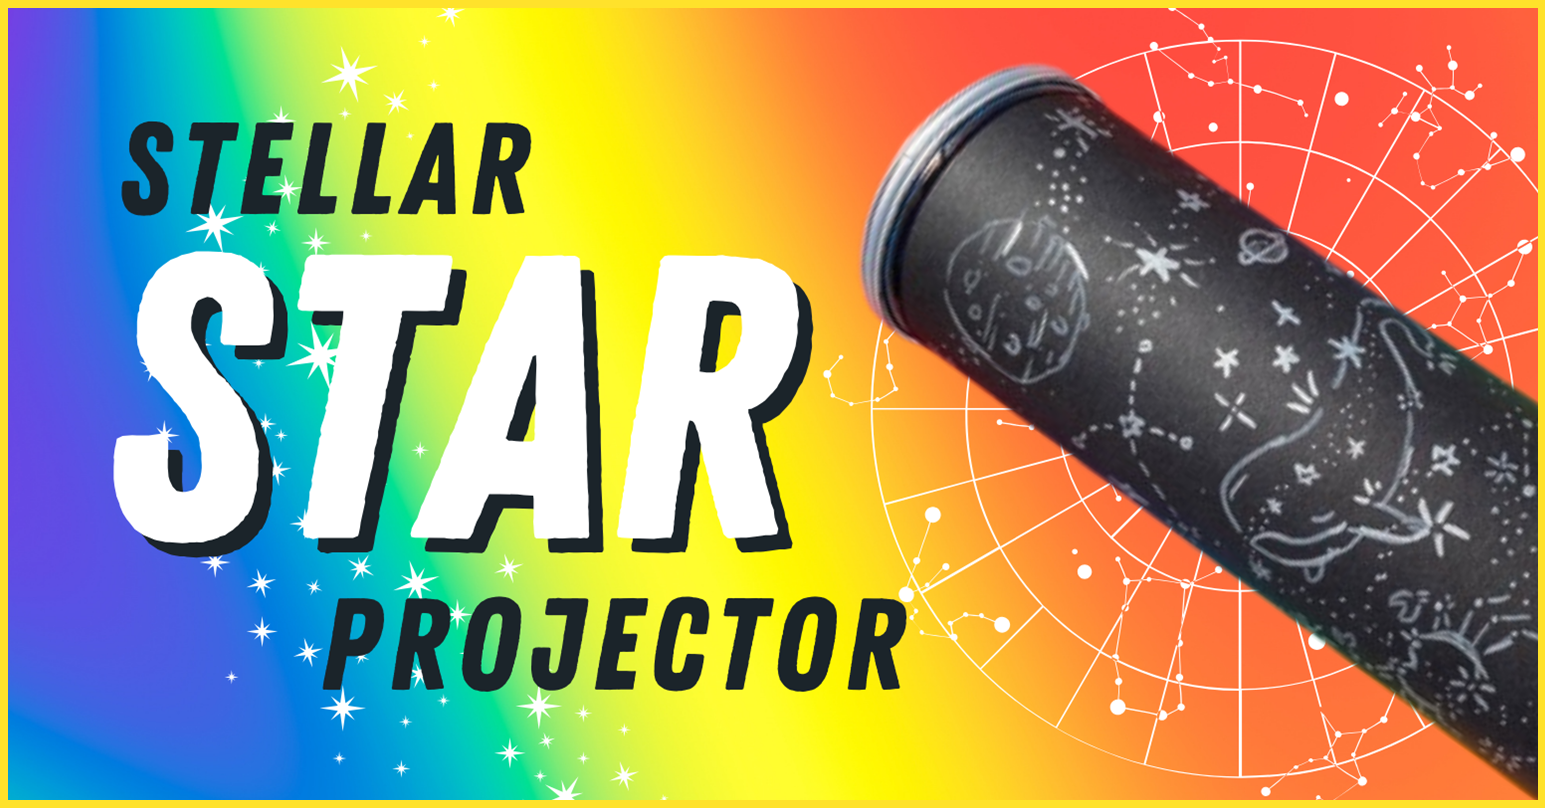 Star projector device against a rainbow background